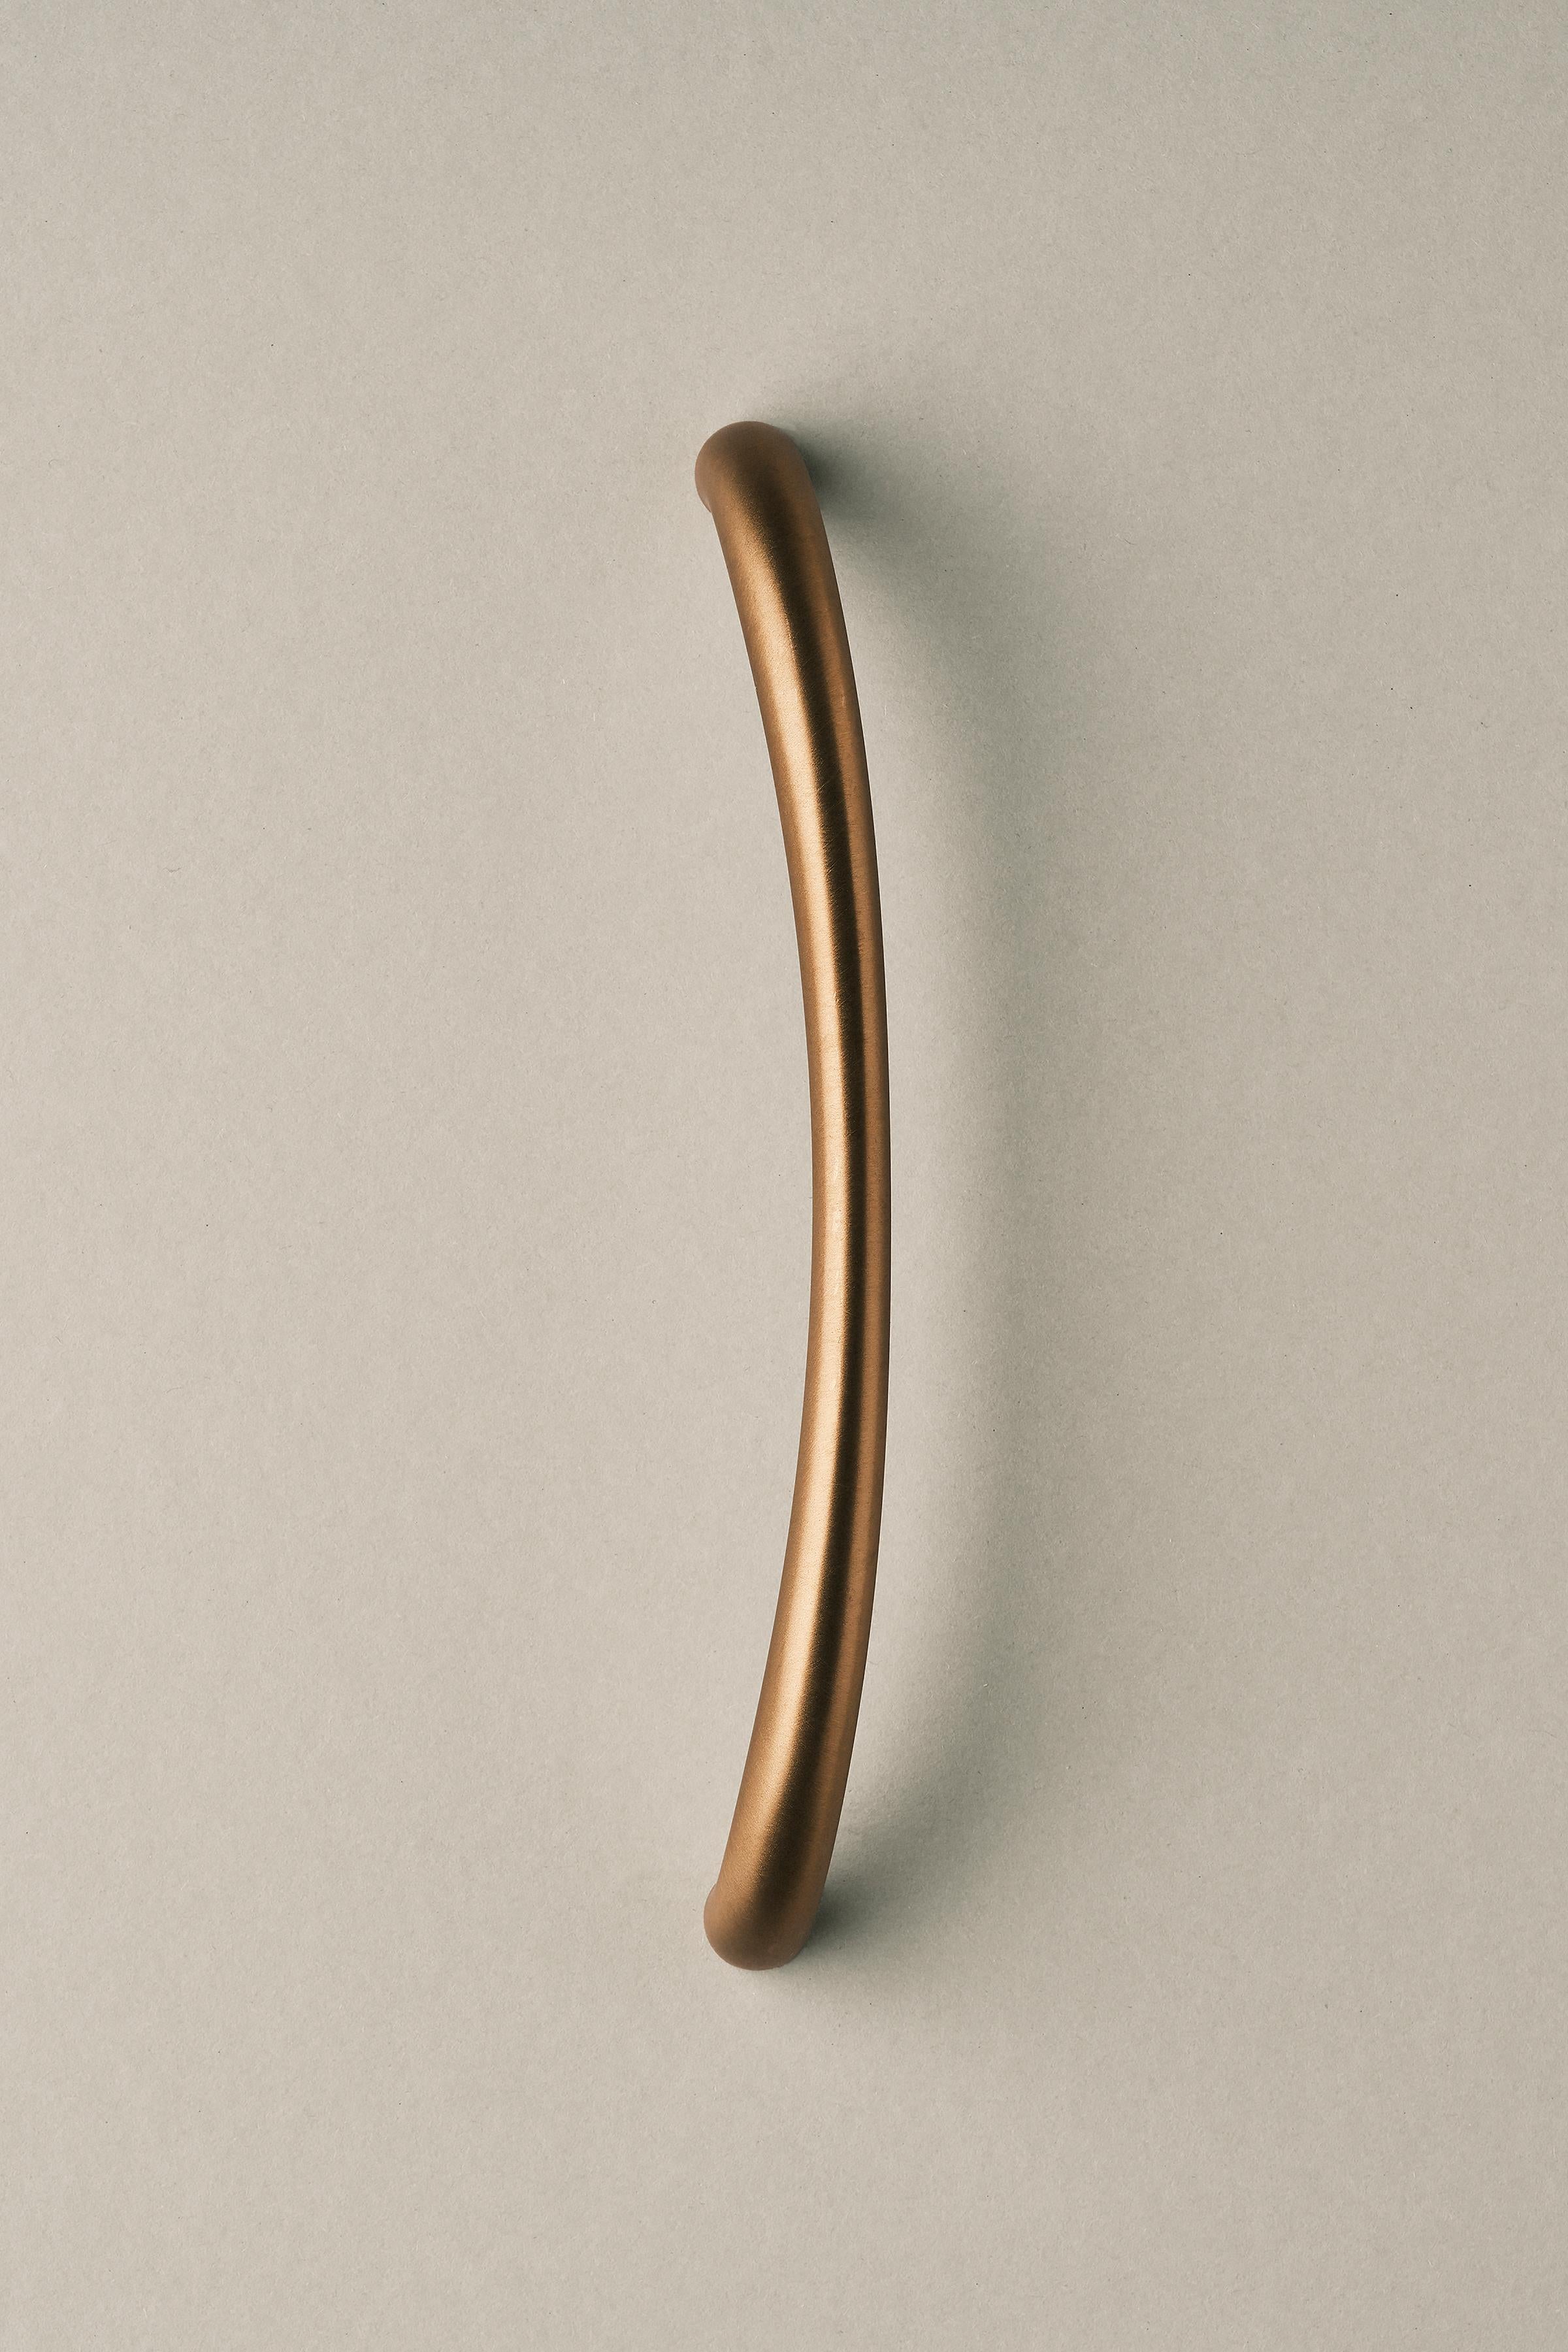 Contemporary Door Handle / Knob 'Suave' by Spaces Within, Dark Brass For Sale 2